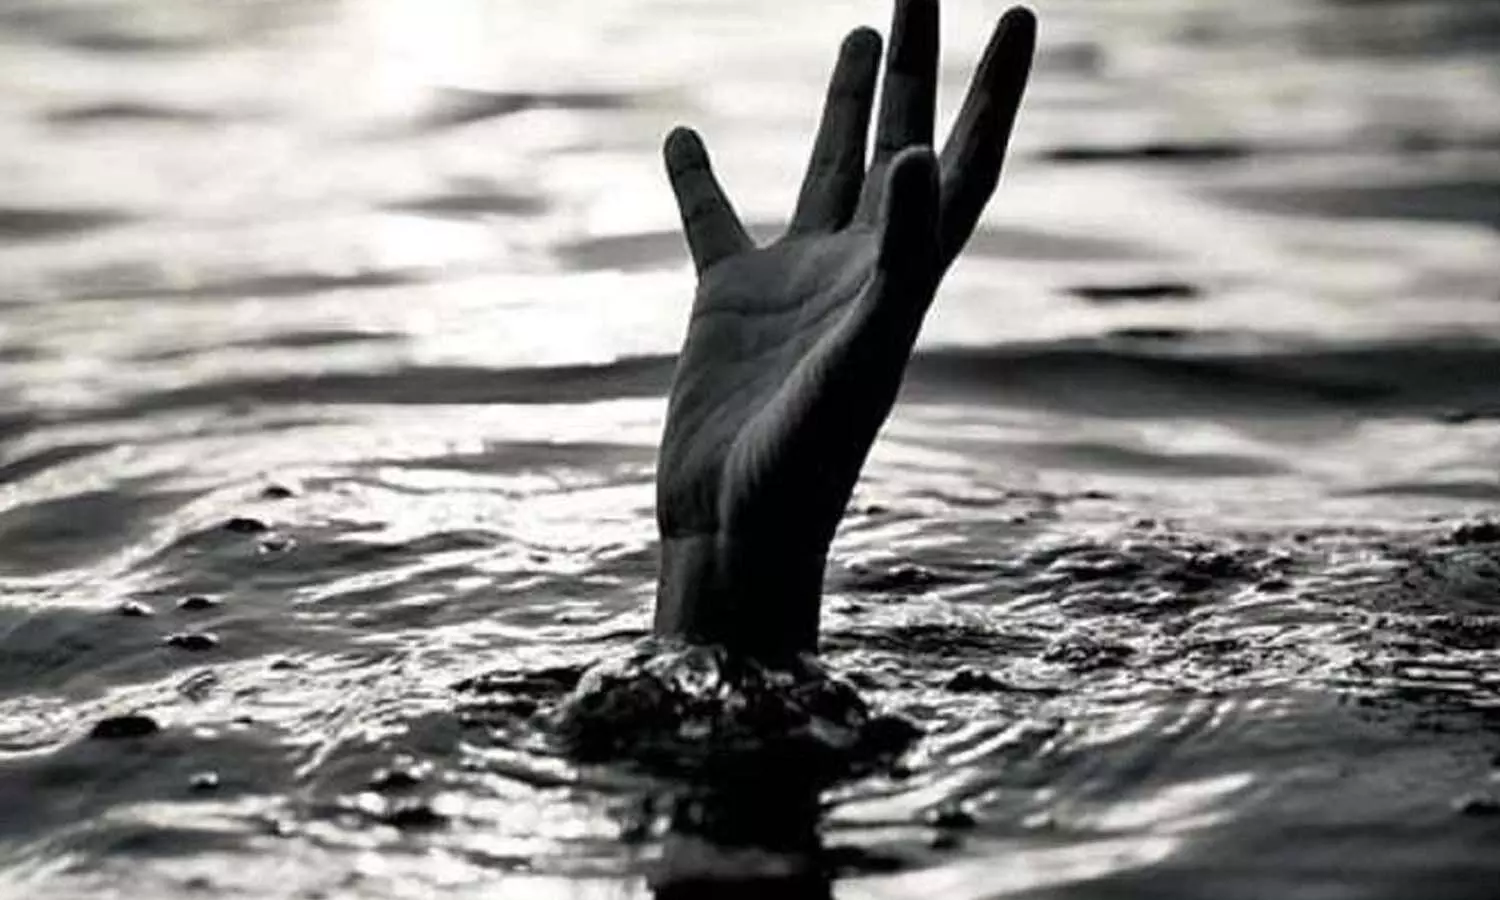 woman and three children died due to drowning in pond in samastipur district bihar